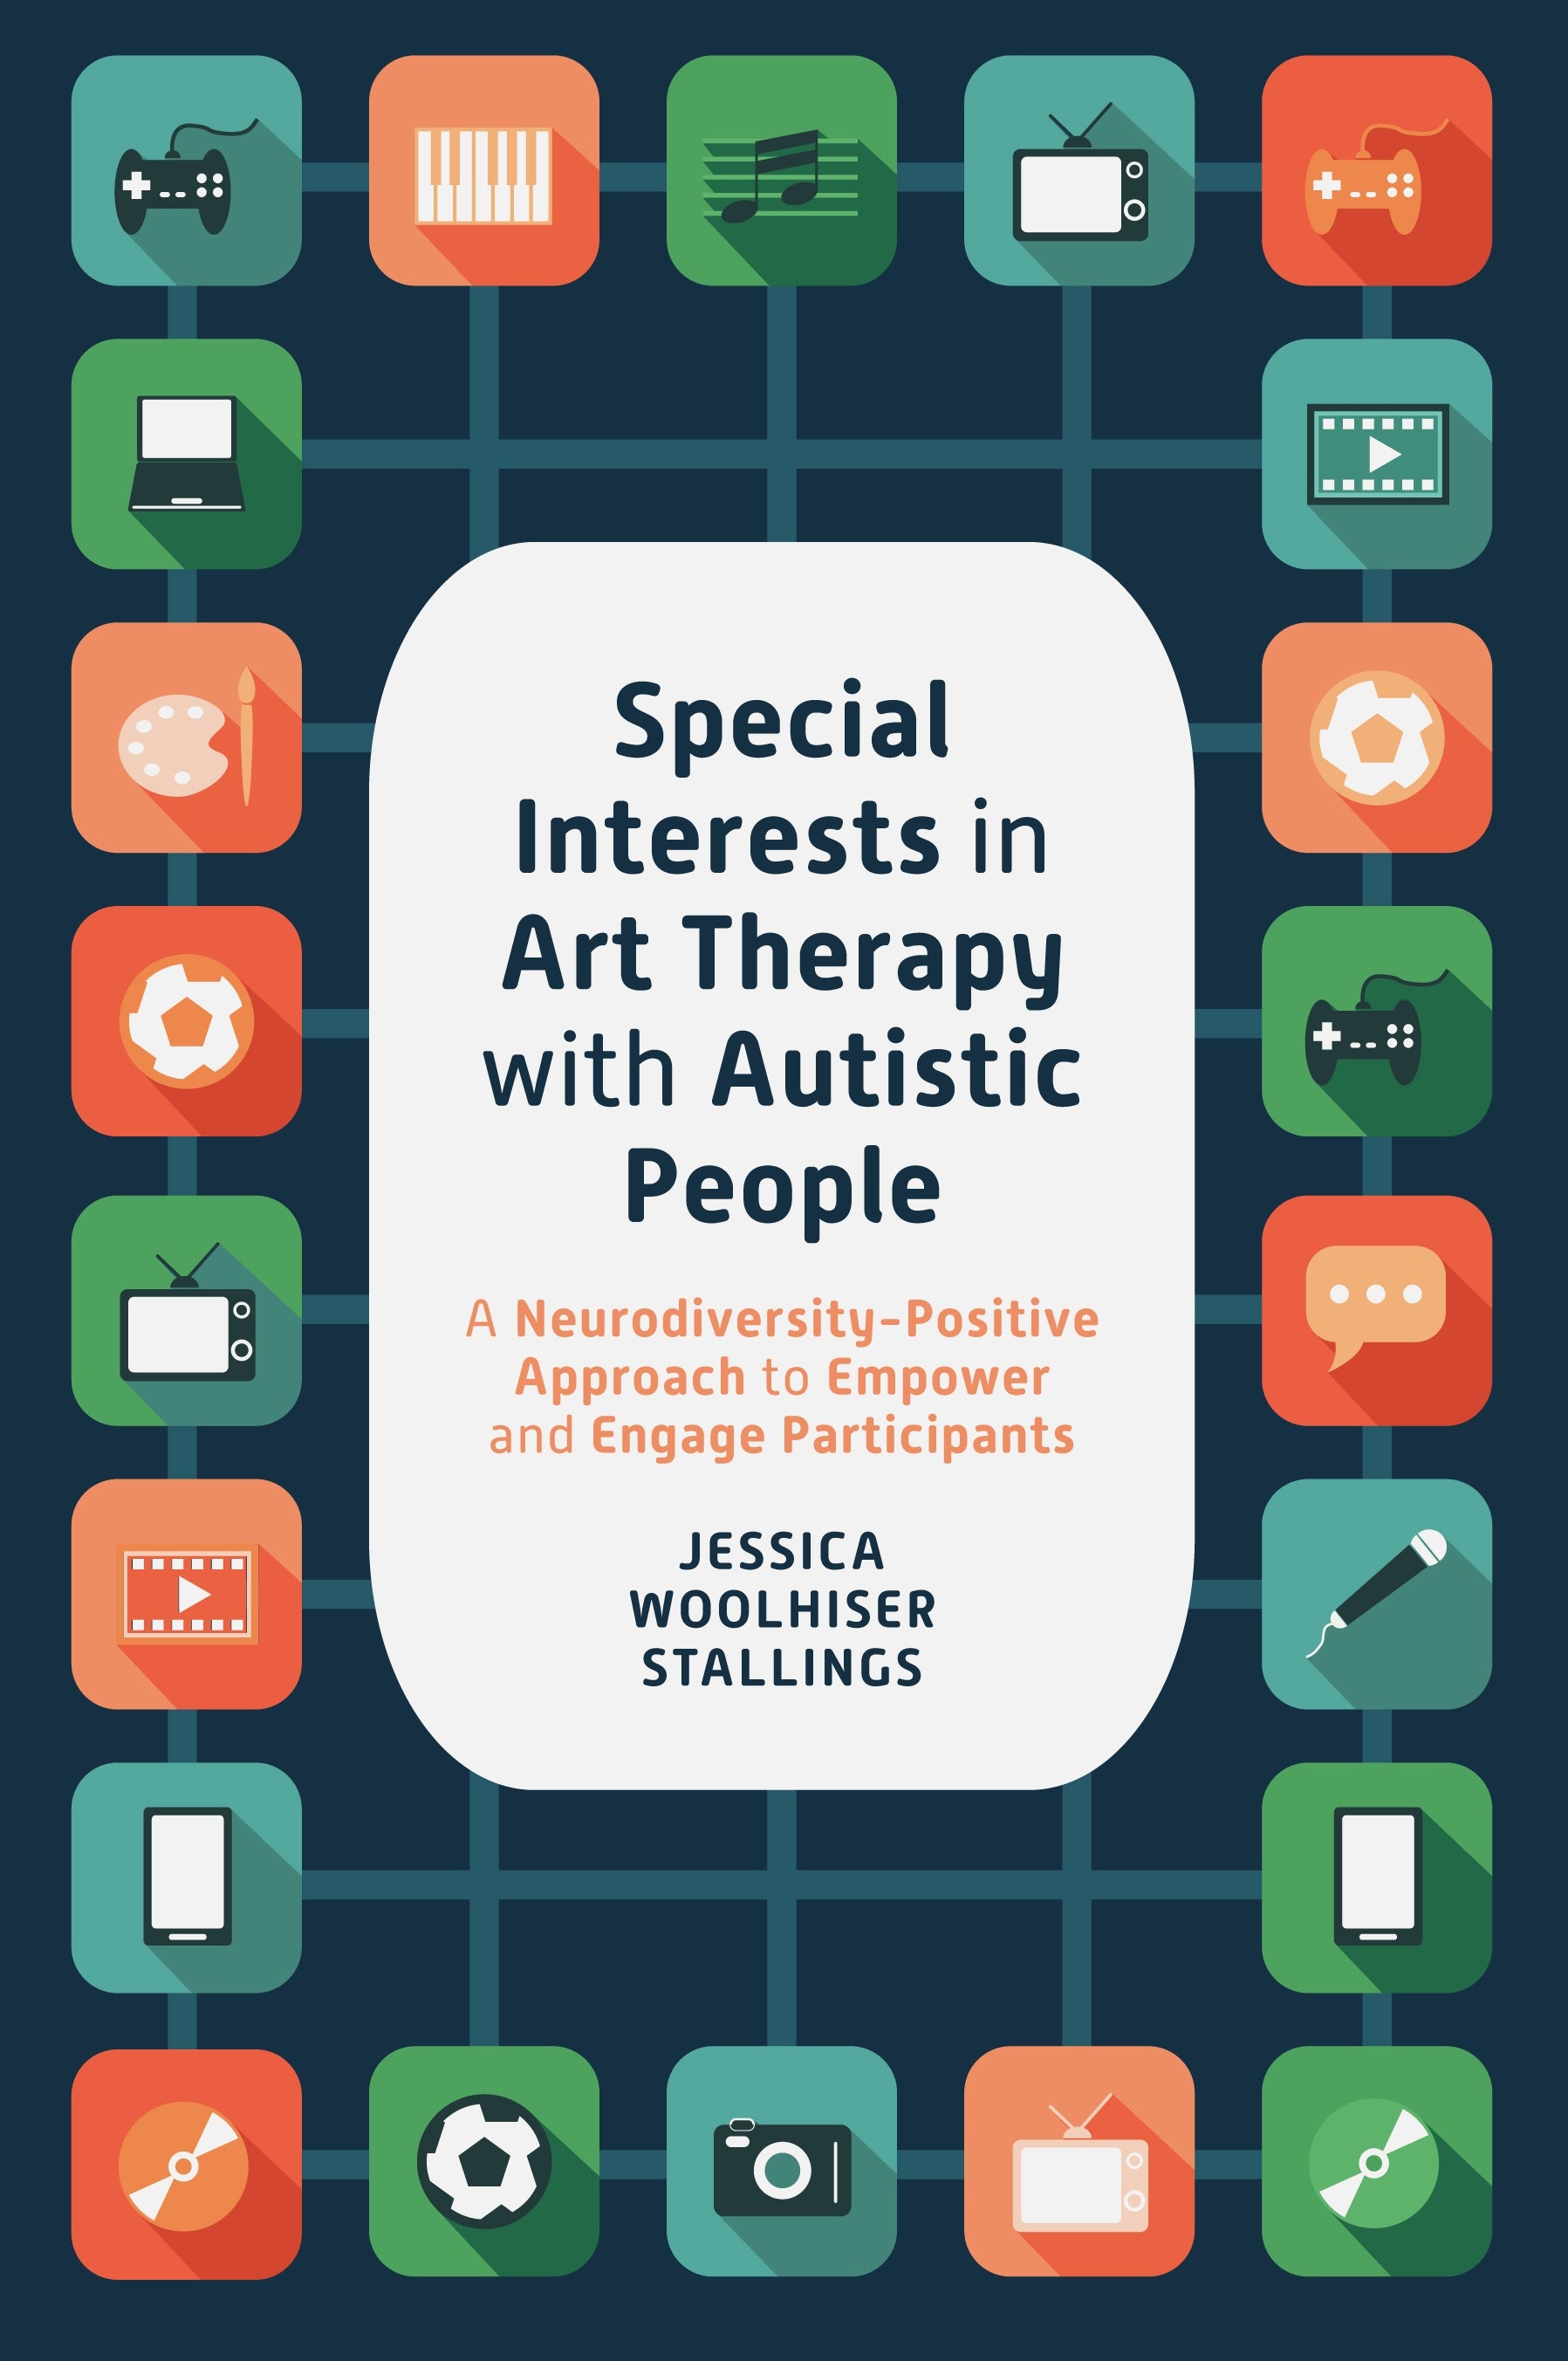 Special Interests in Art Therapy with Autistic People by Jessica Woolhiser Stallings